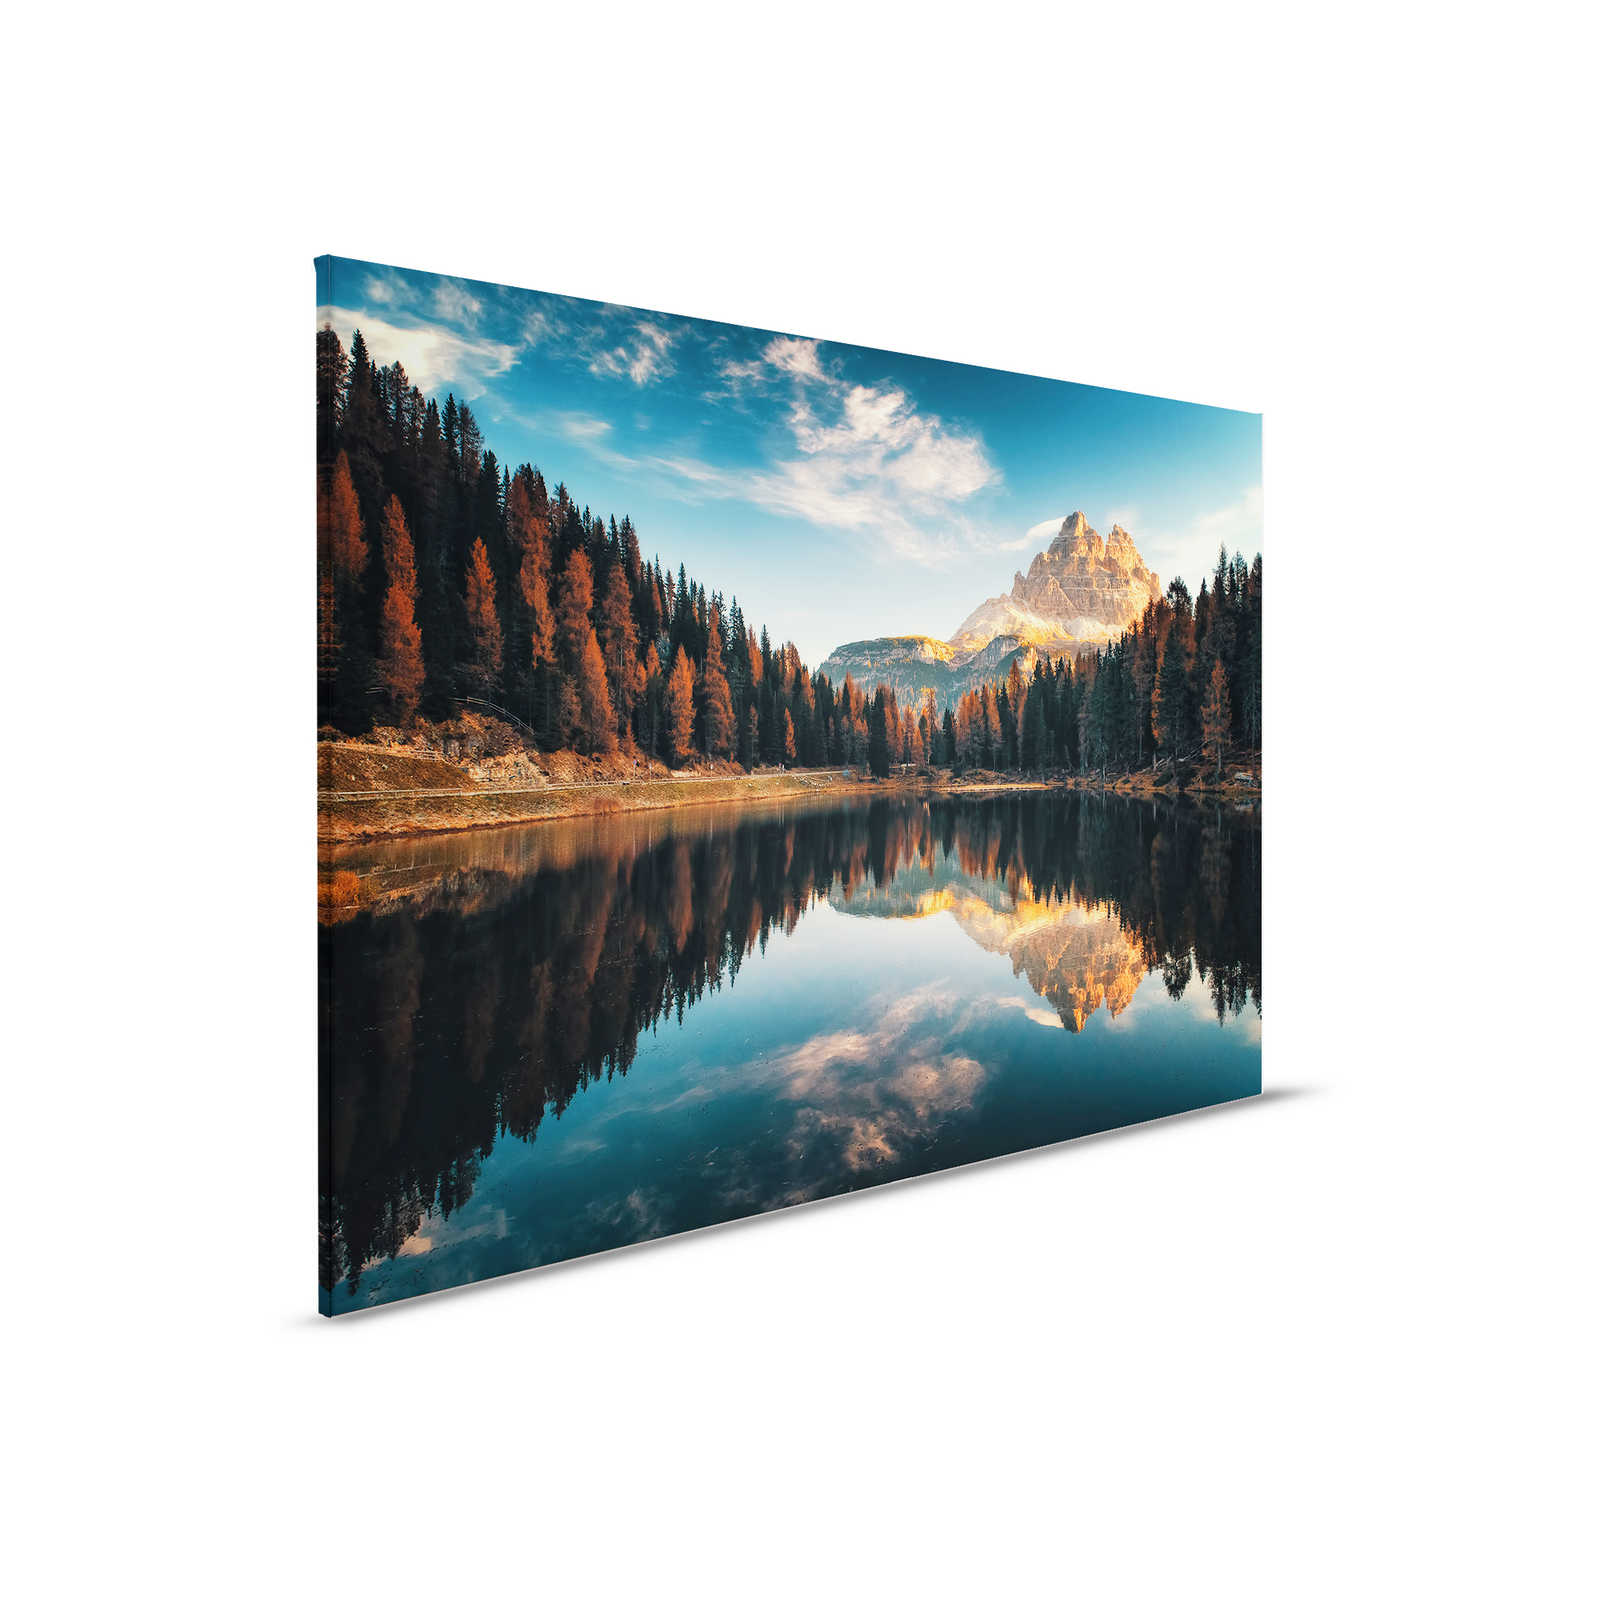         Canvas painting with mountain landscape and lake - 0.90 m x 0.60 m
    